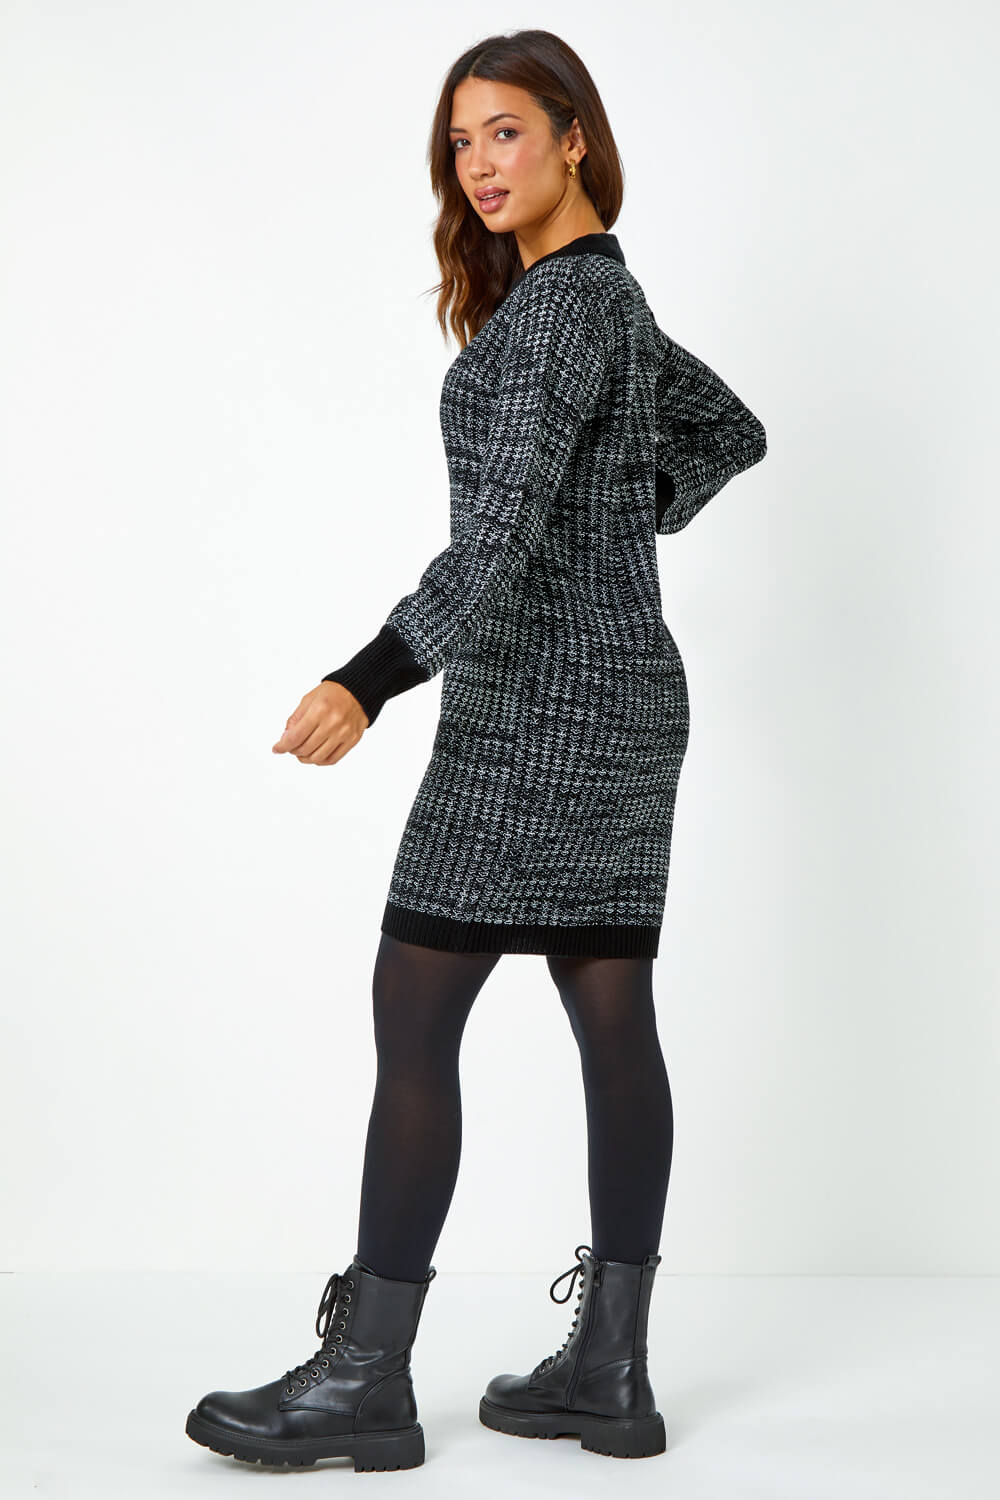 Charcoal Collared Knitted Jumper Dress, Image 3 of 5